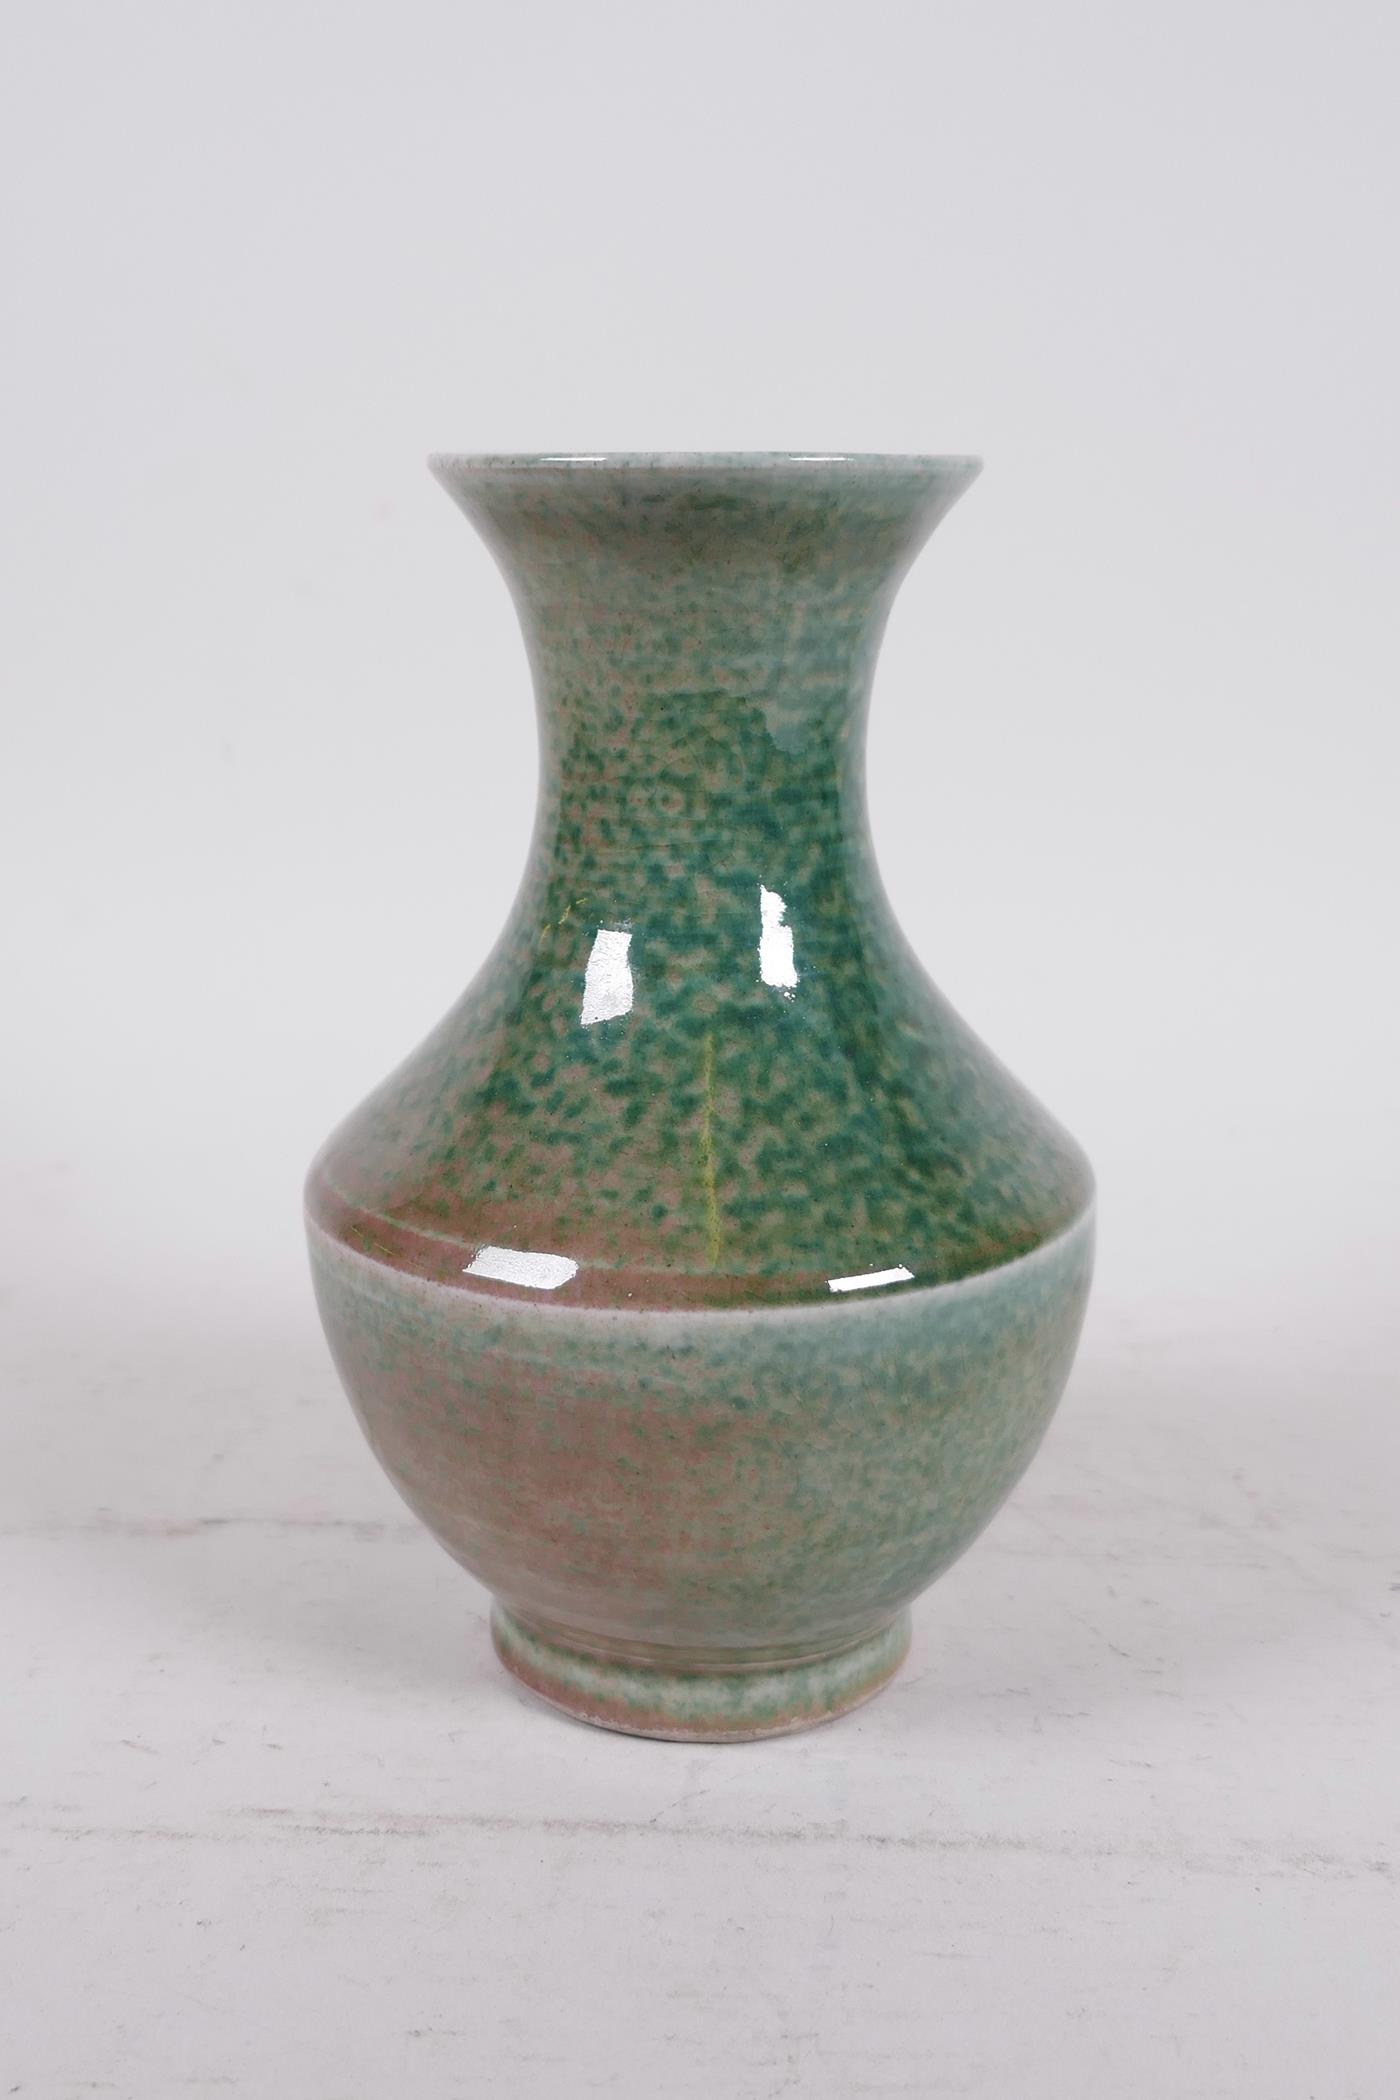 A Chinese mottled green glazed pottery vase, 6" high - Image 3 of 4